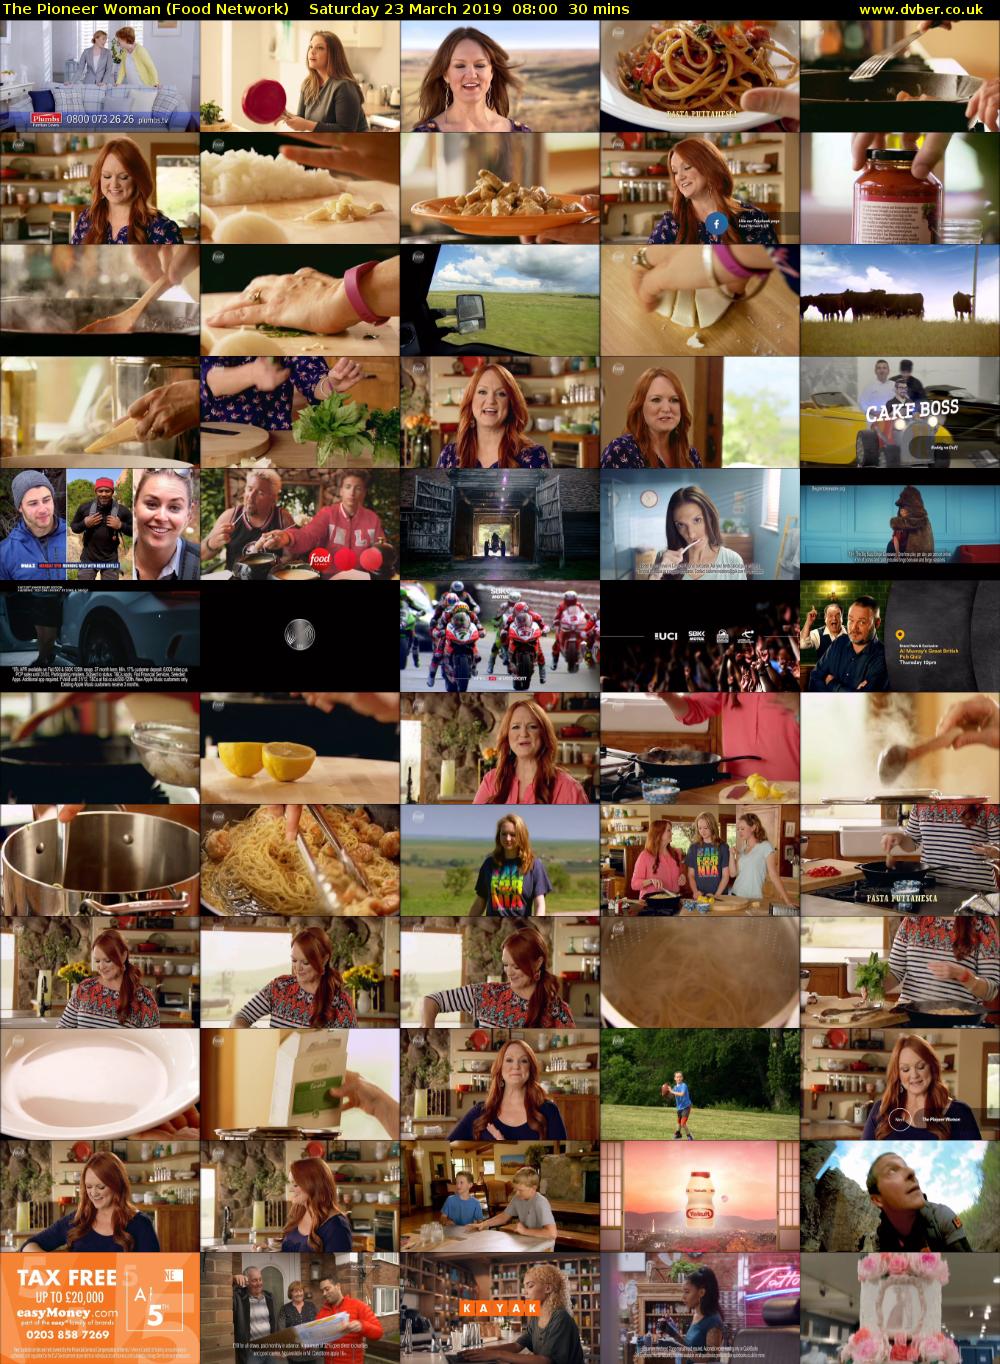 The Pioneer Woman (Food Network) Saturday 23 March 2019 08:00 - 08:30